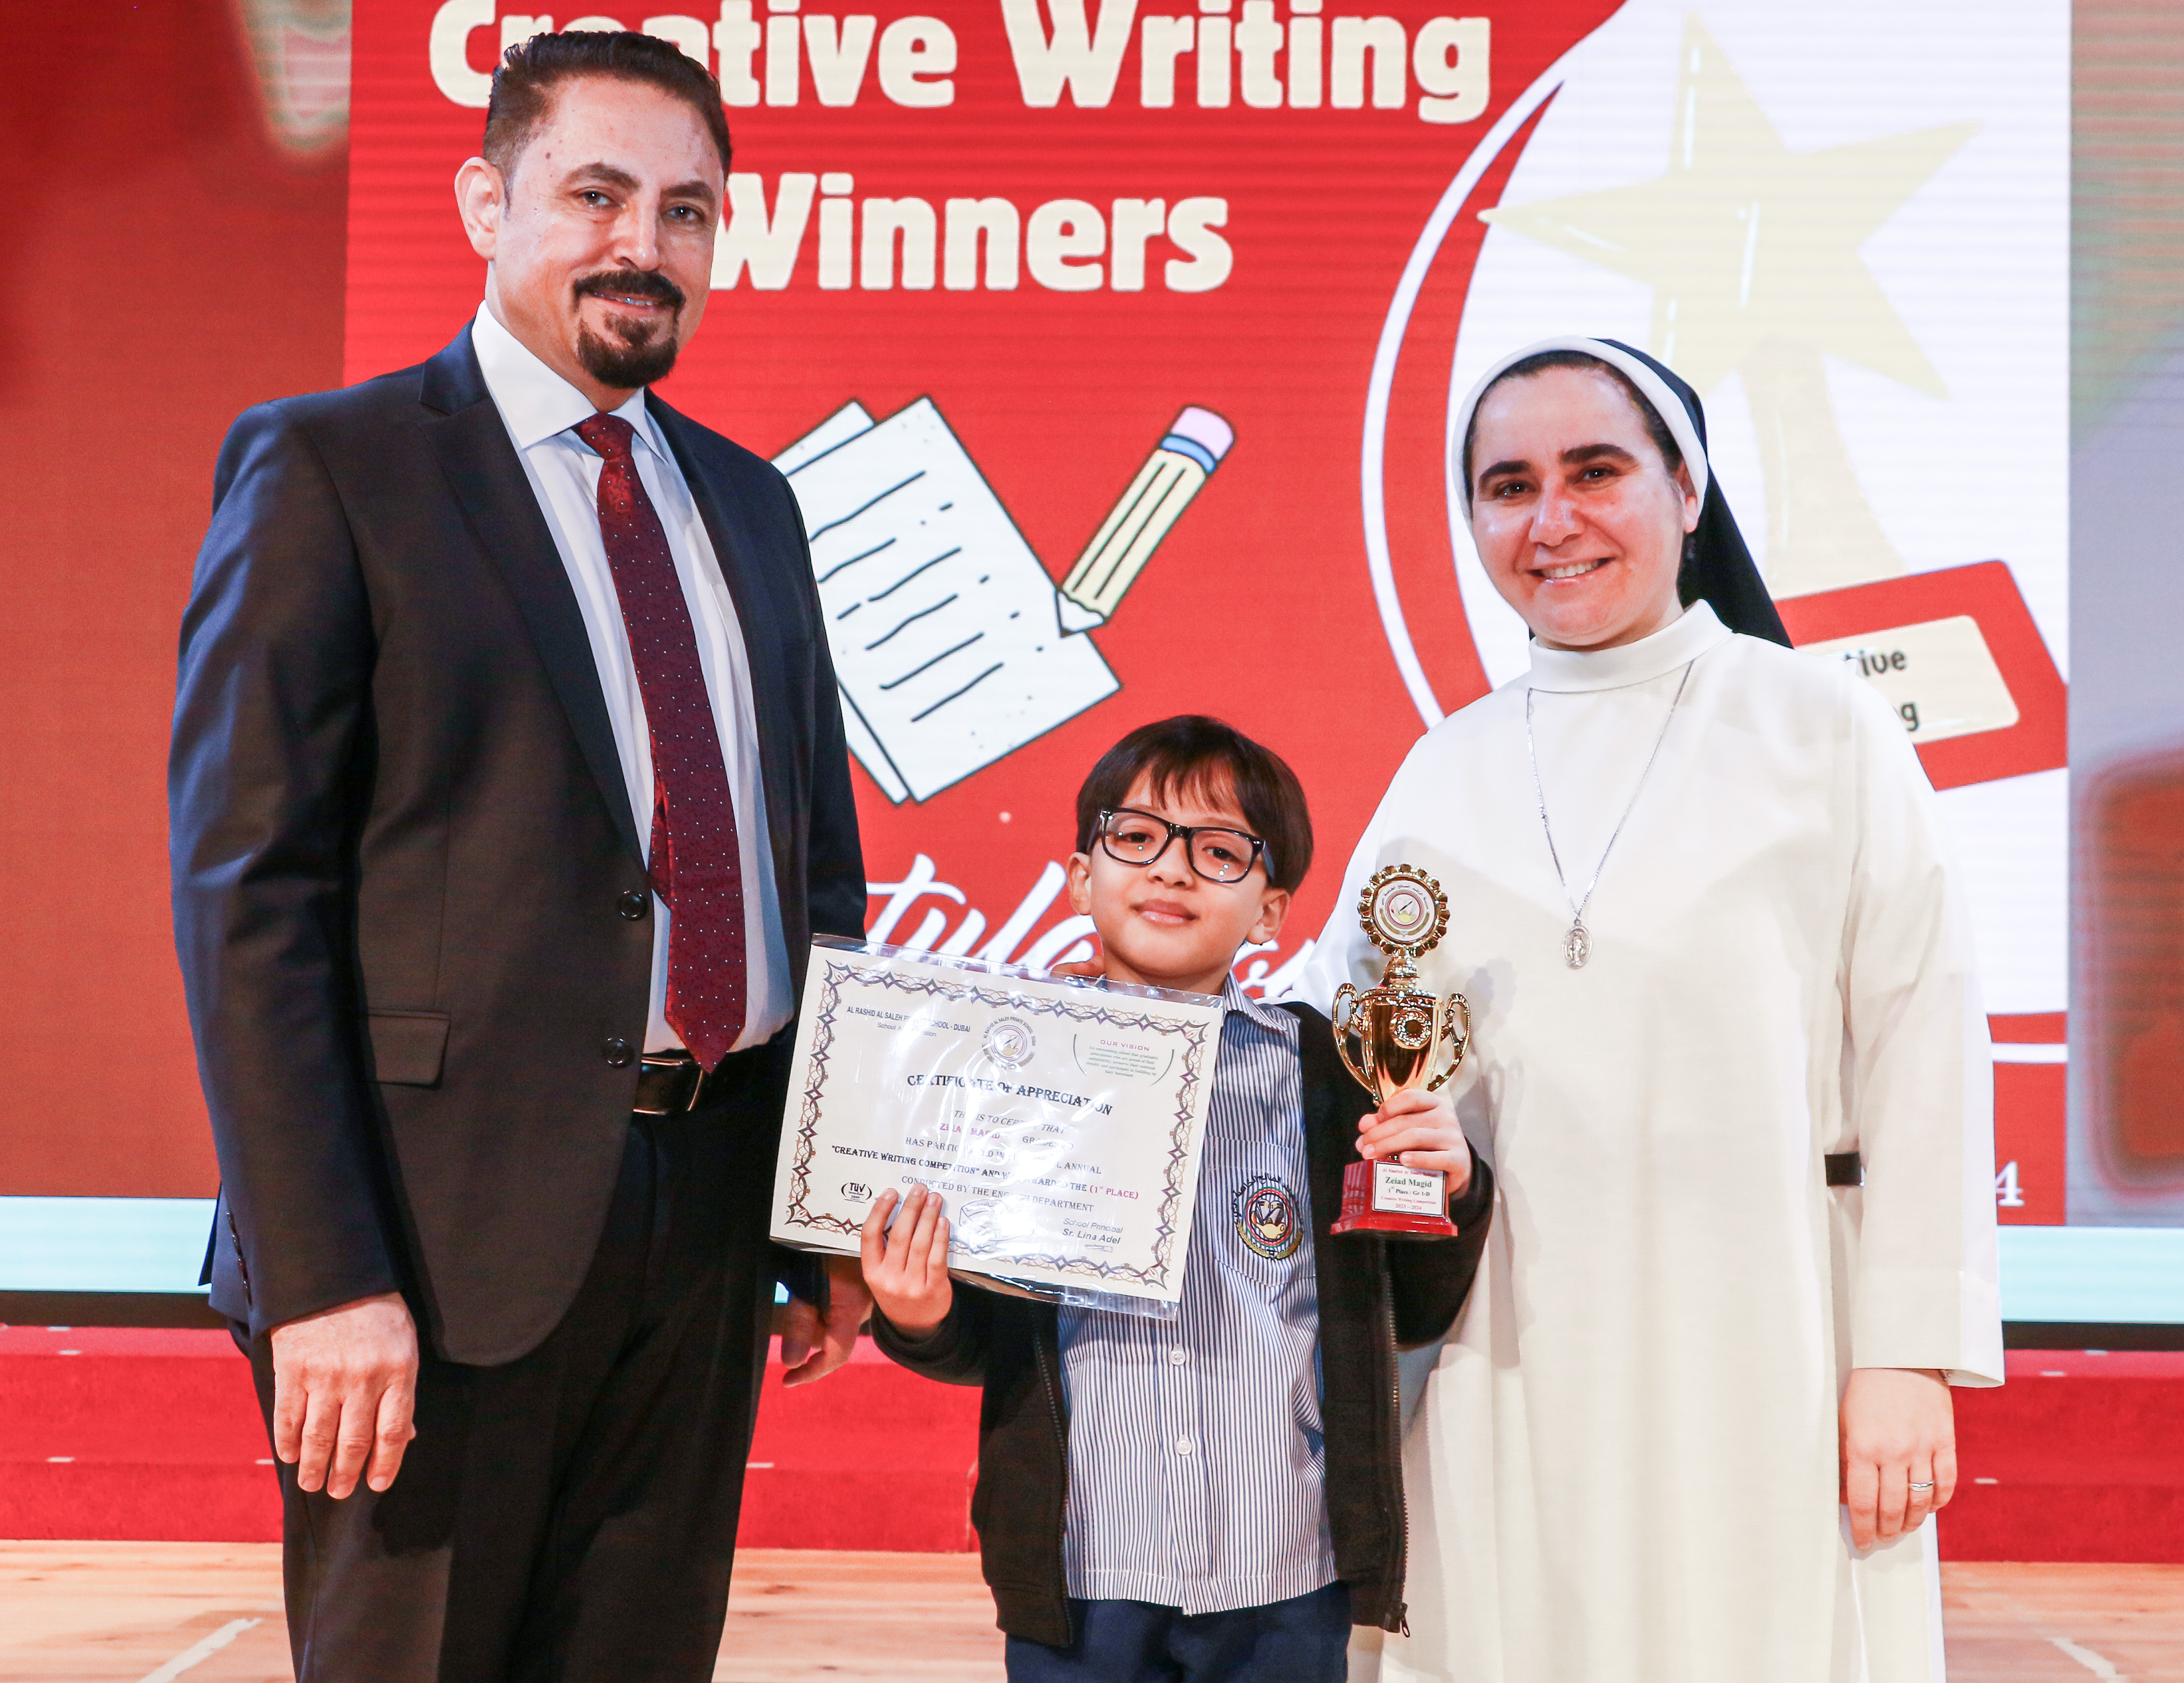  Creative Writing Competition - 2023 - 2024 